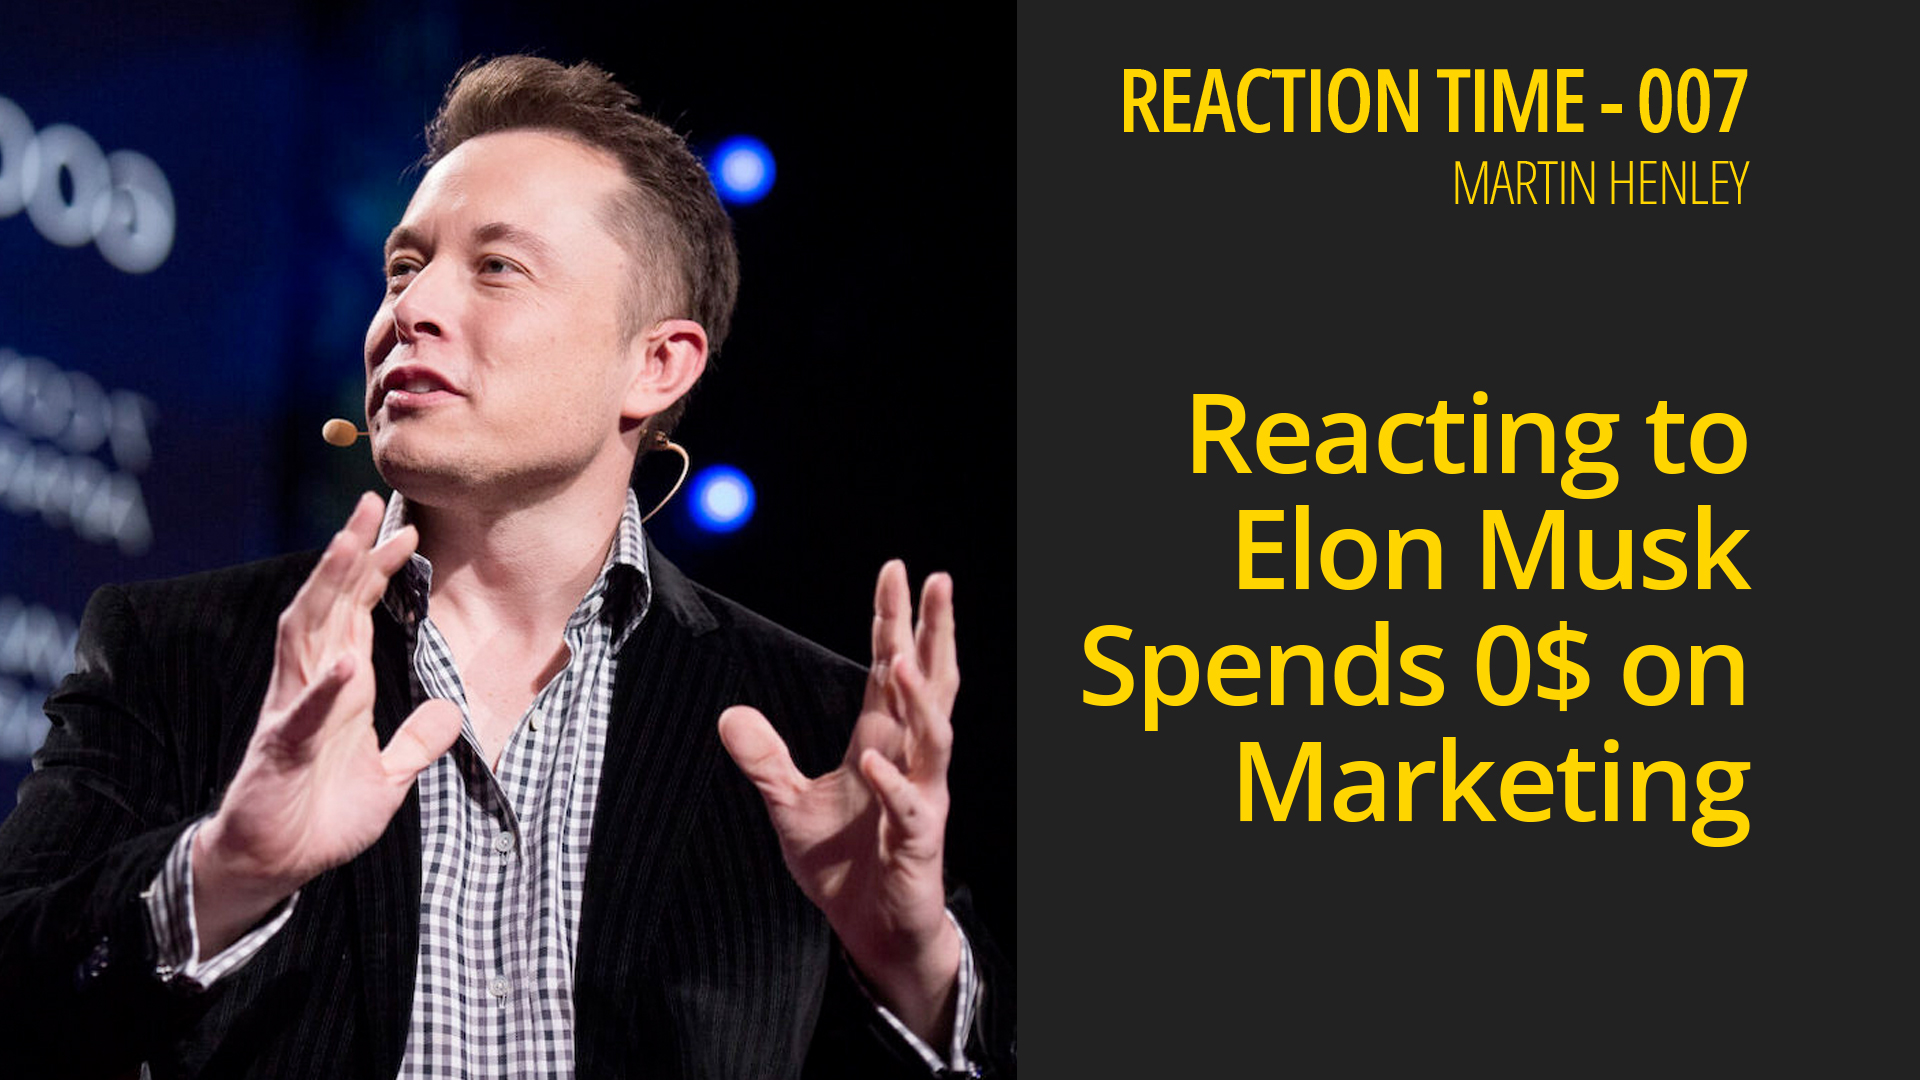 Elon Musk spends 0$ on marketing – Reaction Time 007